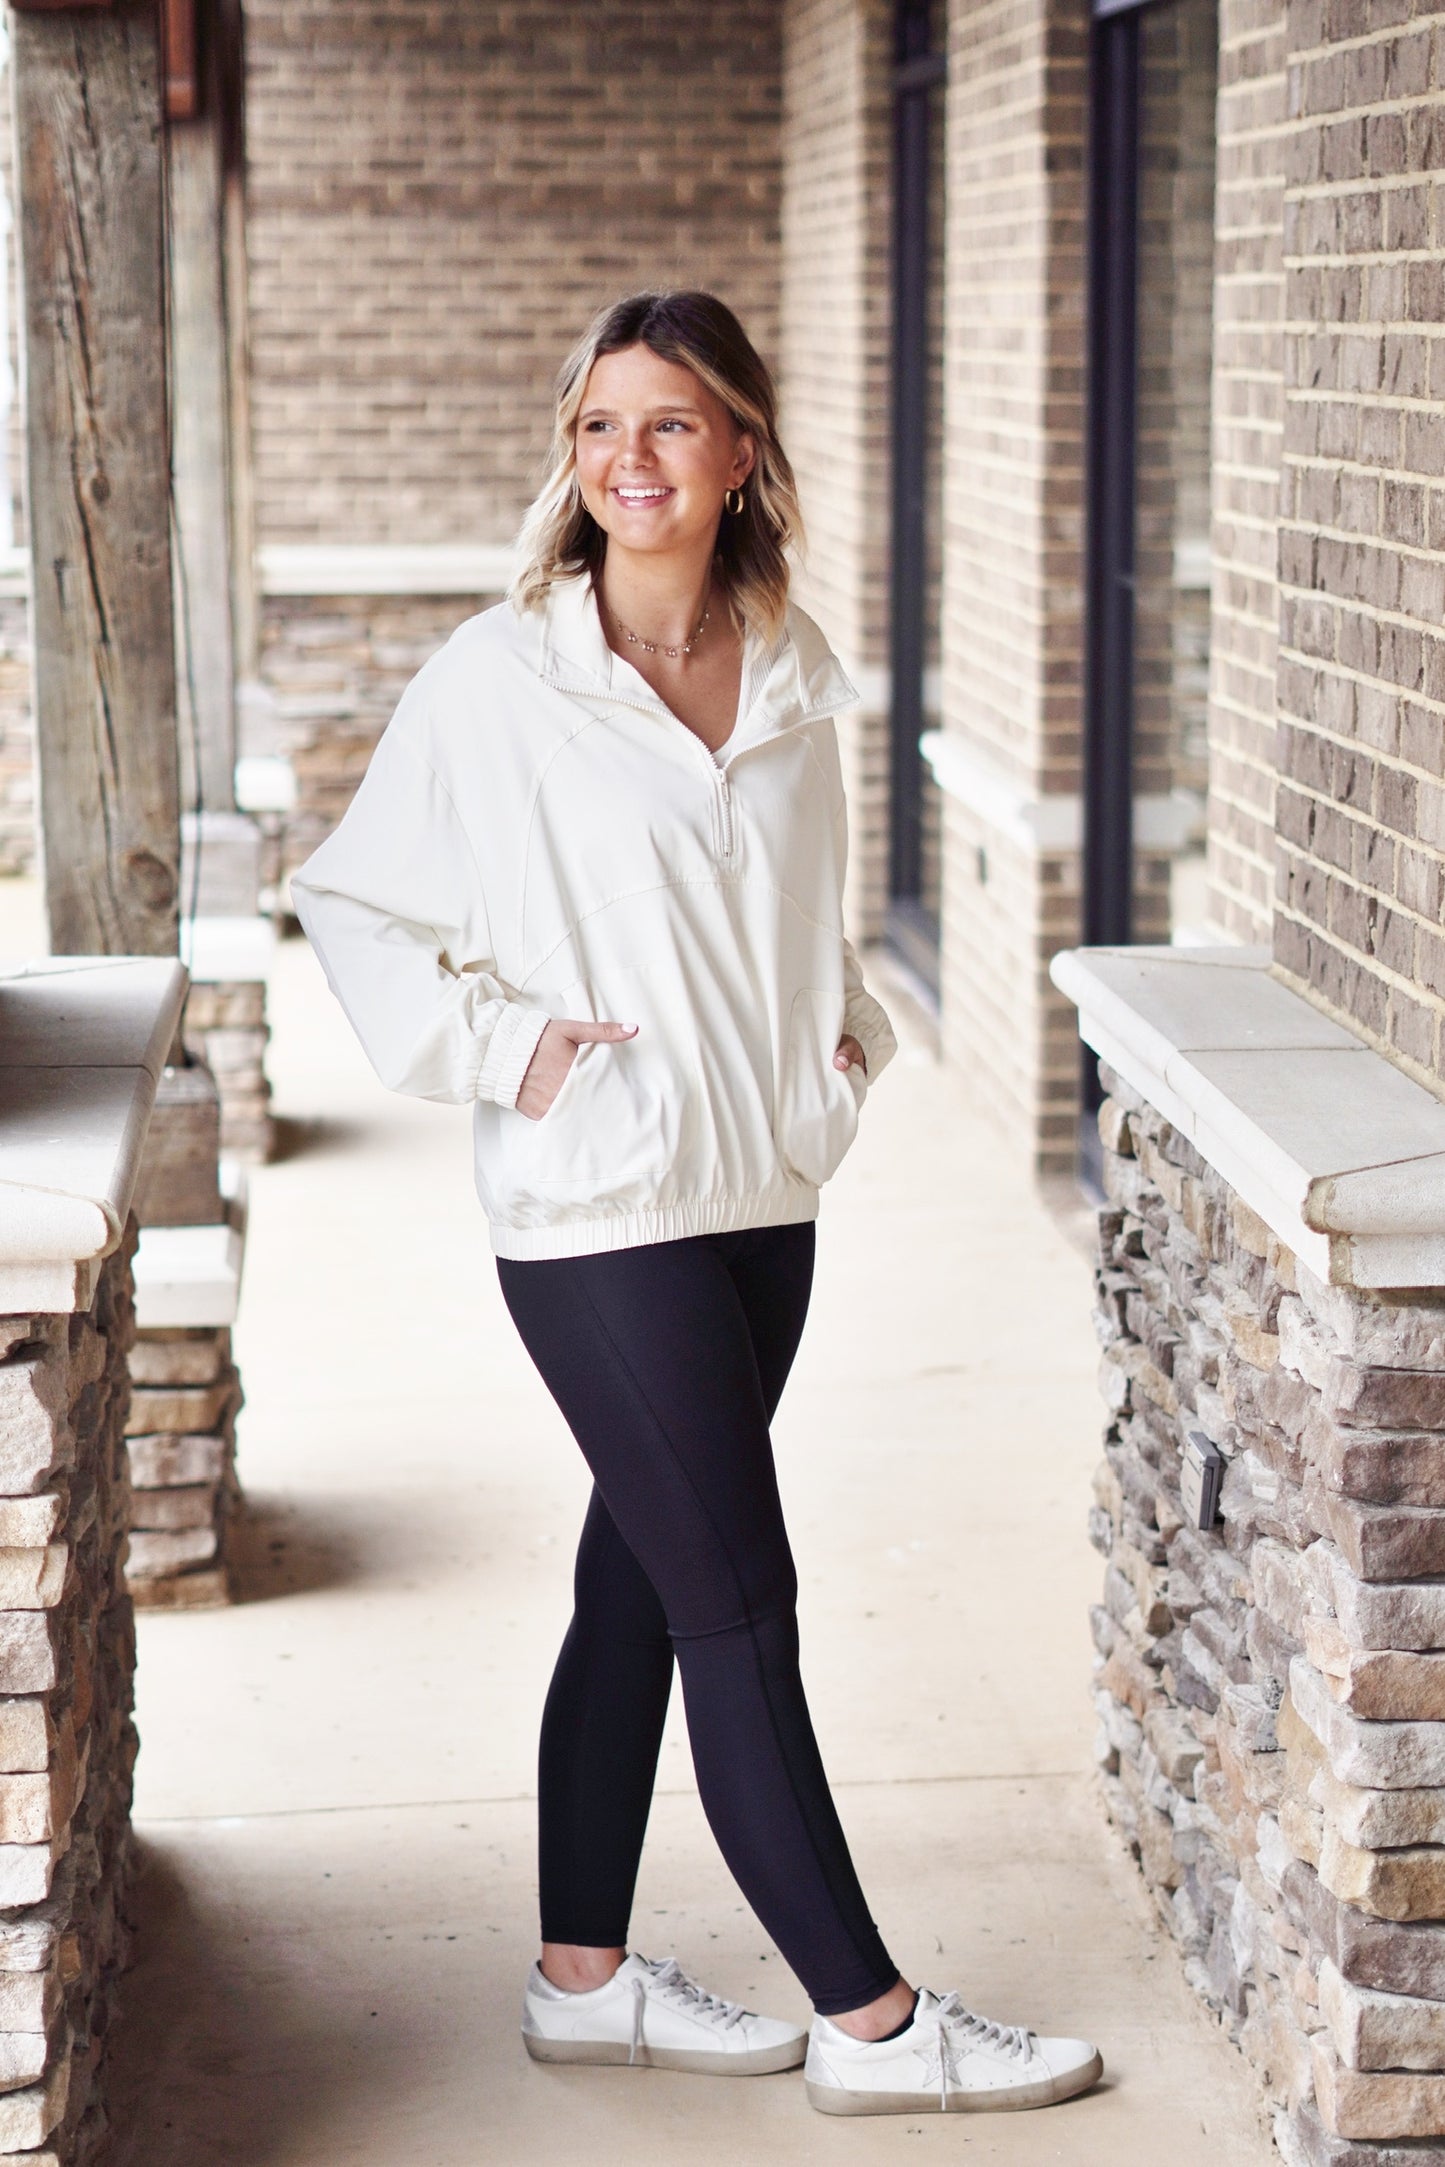 Hannah Half Zip Pullover Half Zip, Collar neckline Color/ Soft Beige Long Sleeve Elastic Band On End Of Sleeves And Waistline Two Front Pockets Relaxed Fit Full Length 100% Polyester. Blonde model, black leggings, sneakers. Brick and stone background.